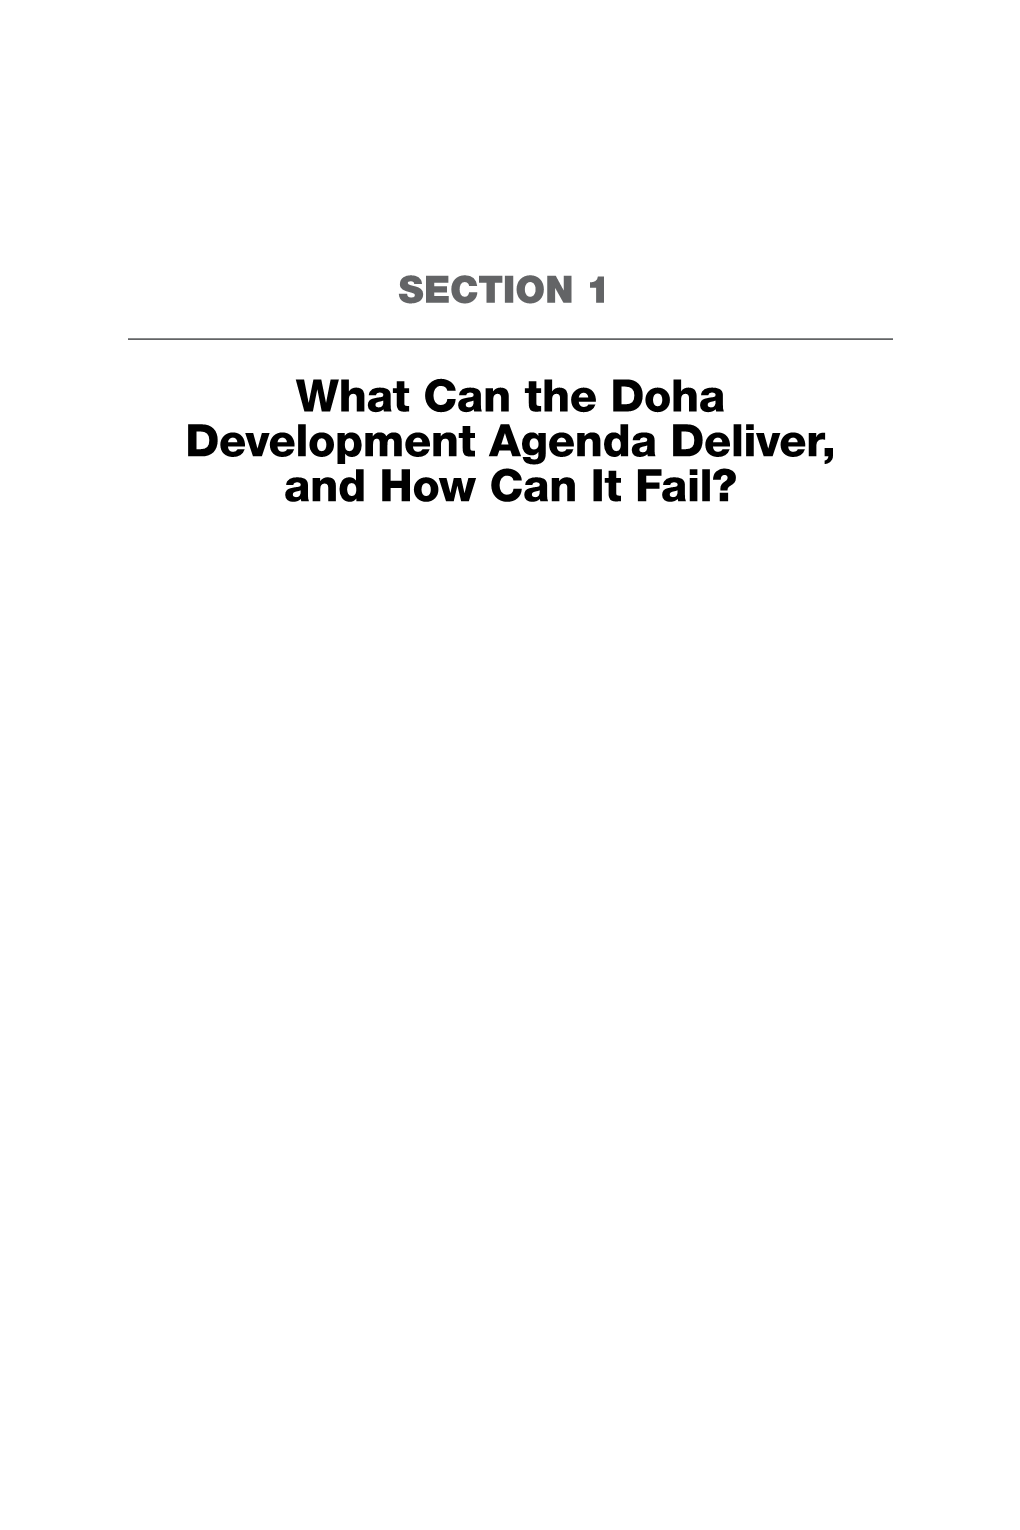 What Can the Doha Development Agenda Deliver, and How Can It Fail?